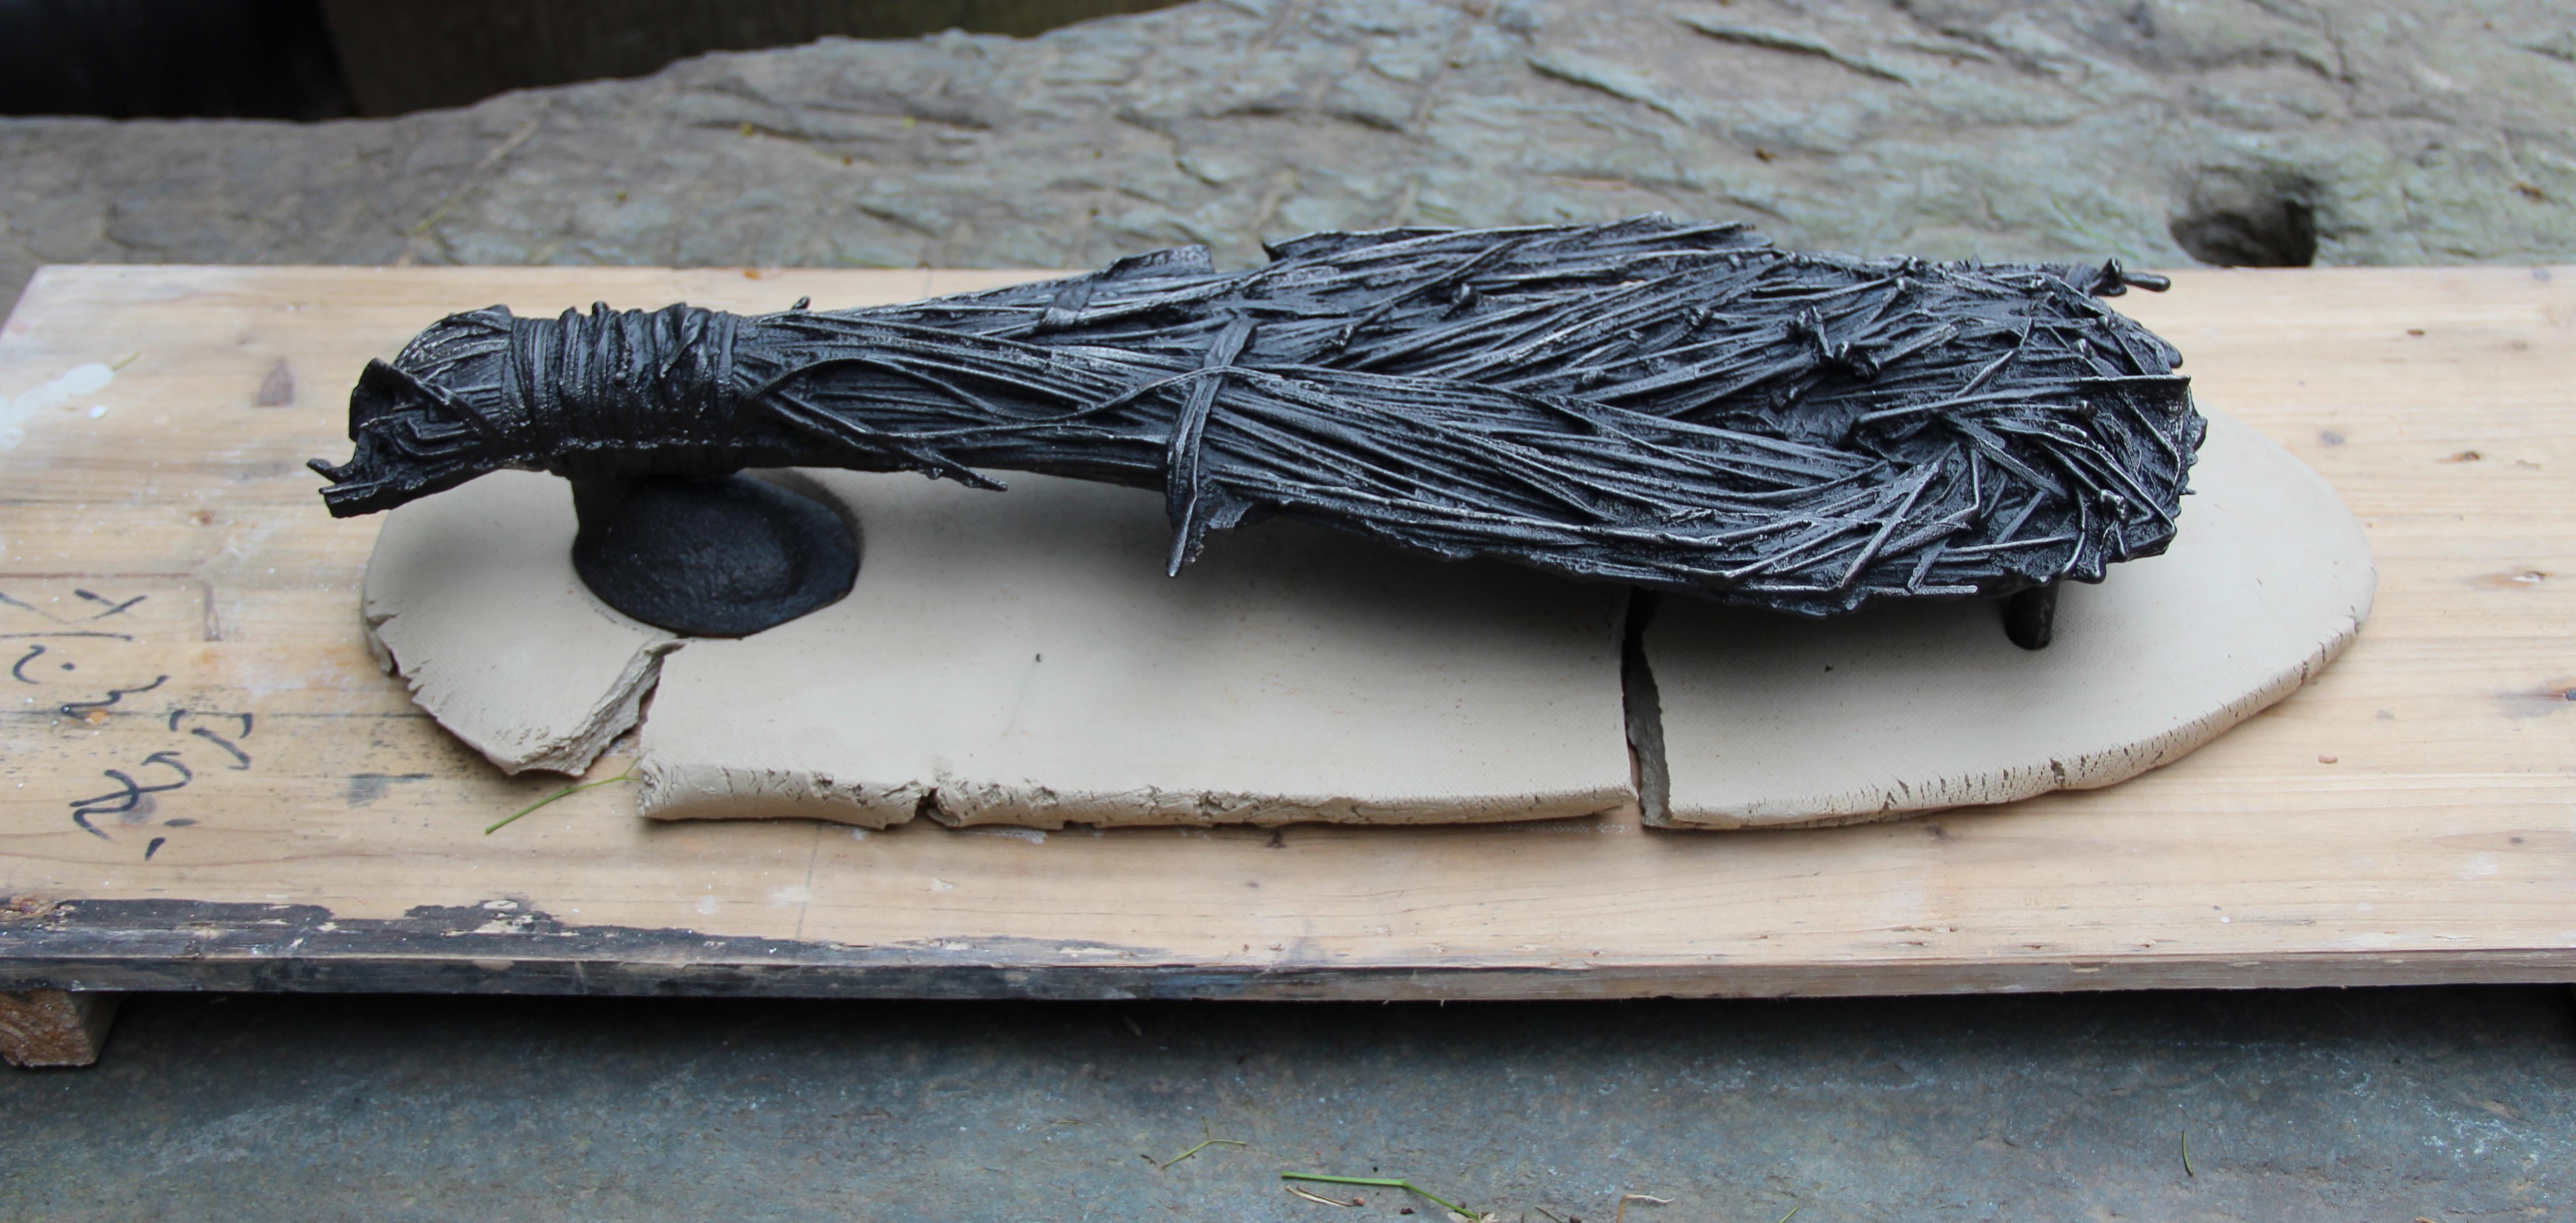 A sculpture that looks like a broom rests on a surface.